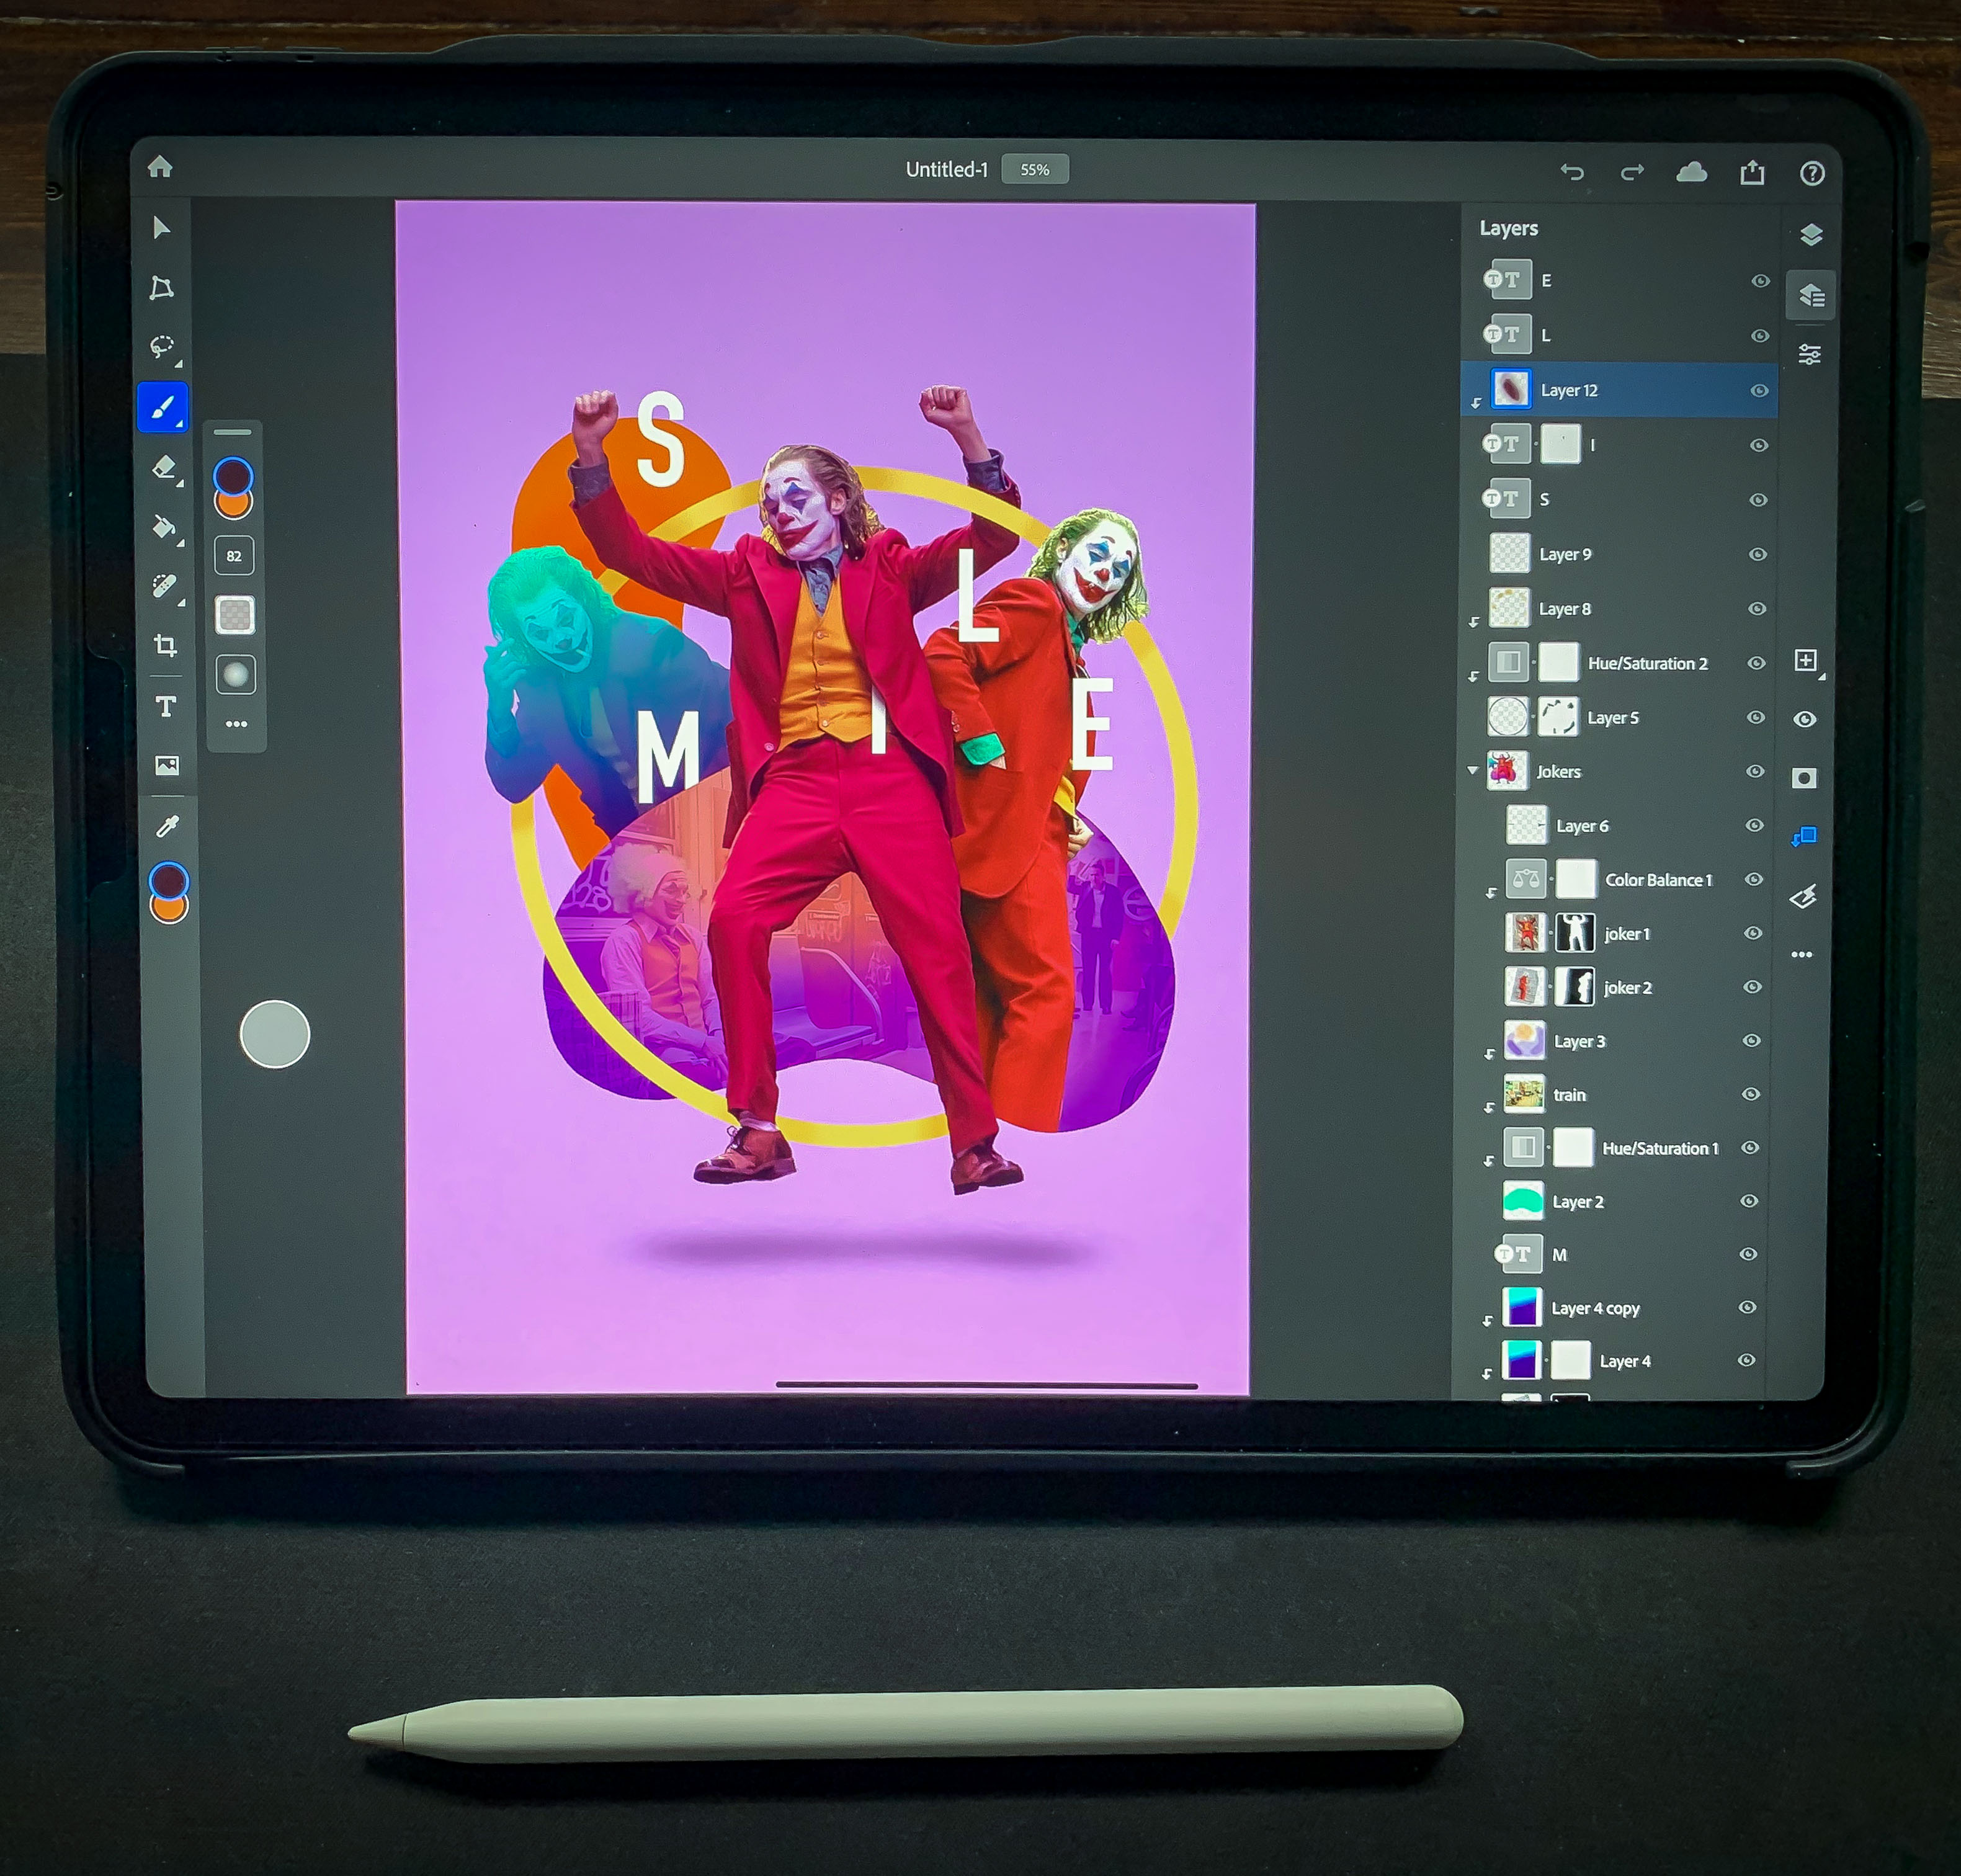 adobe photoshop for ipad 2 free download